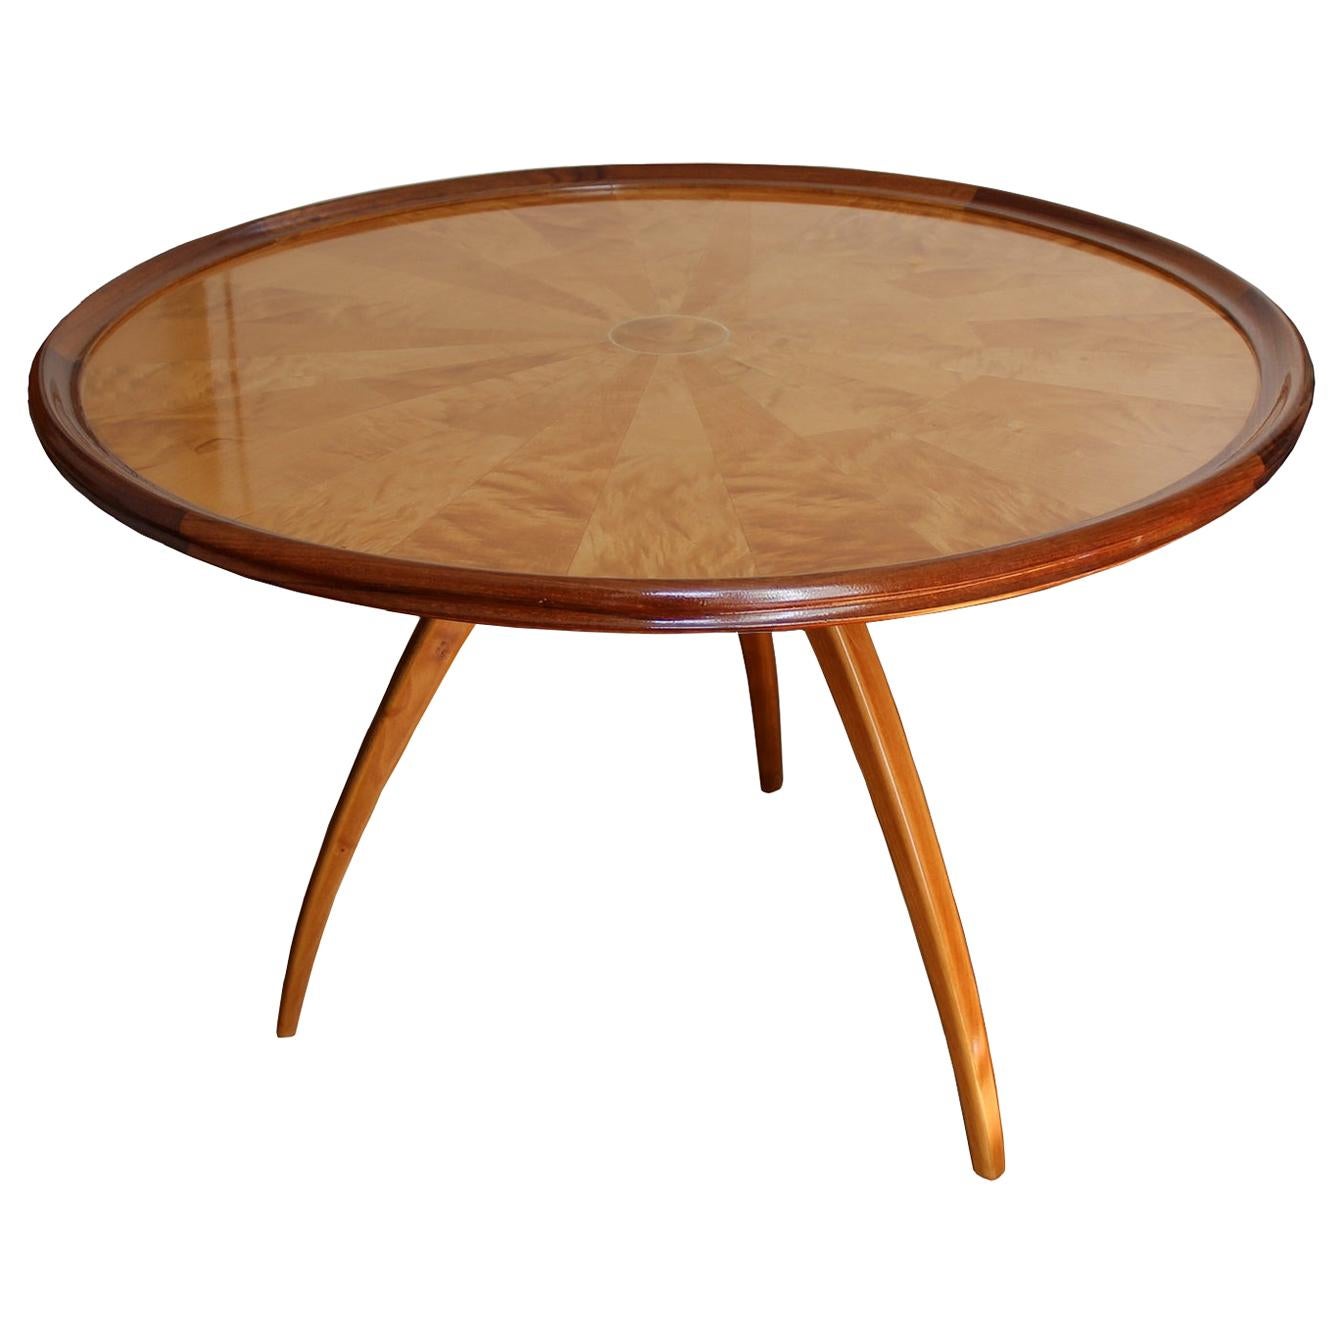 Art Deco Pedestal Table in Sycamore and Blond Mahogany, France, circa 1950